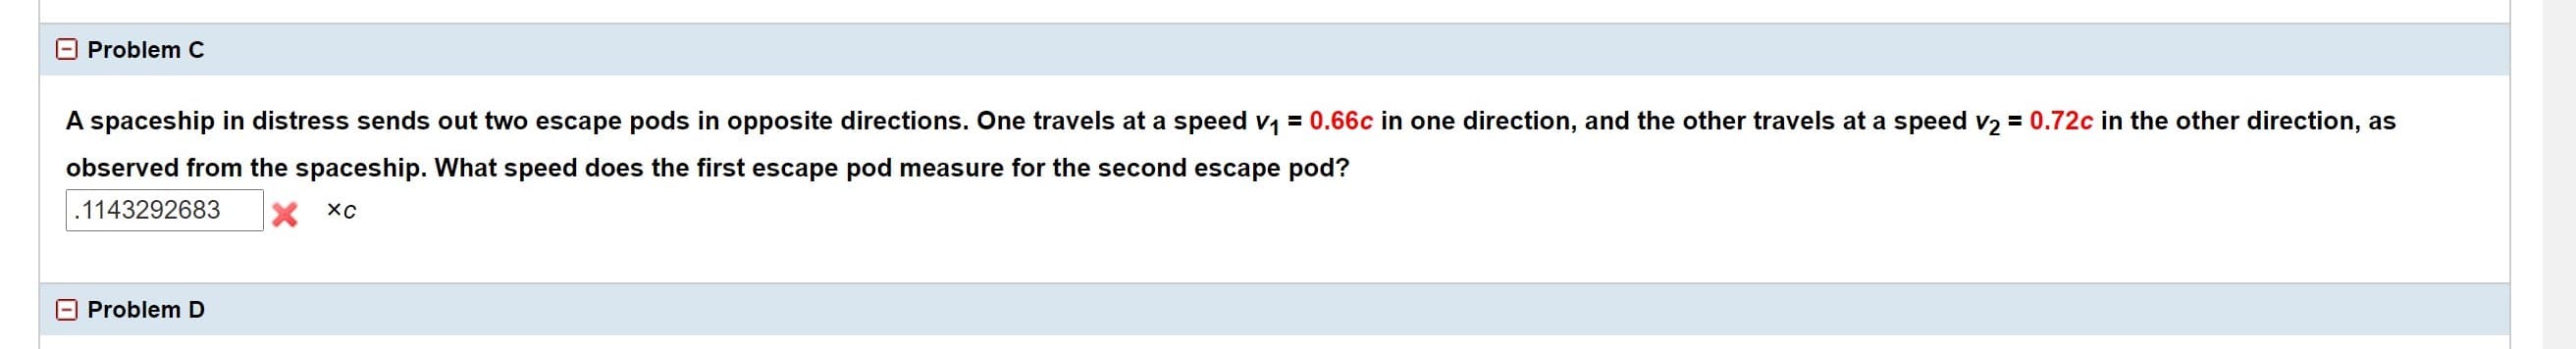 A spaceship in distress sends out two escape pods in opposite directions. One travels at a speed v = 0.66c in one direction, and the other travels at a speed v2 = 0.72c in the other direction, as
observed from the spaceship. What speed does the first escape pod measure for the second escape pod?
